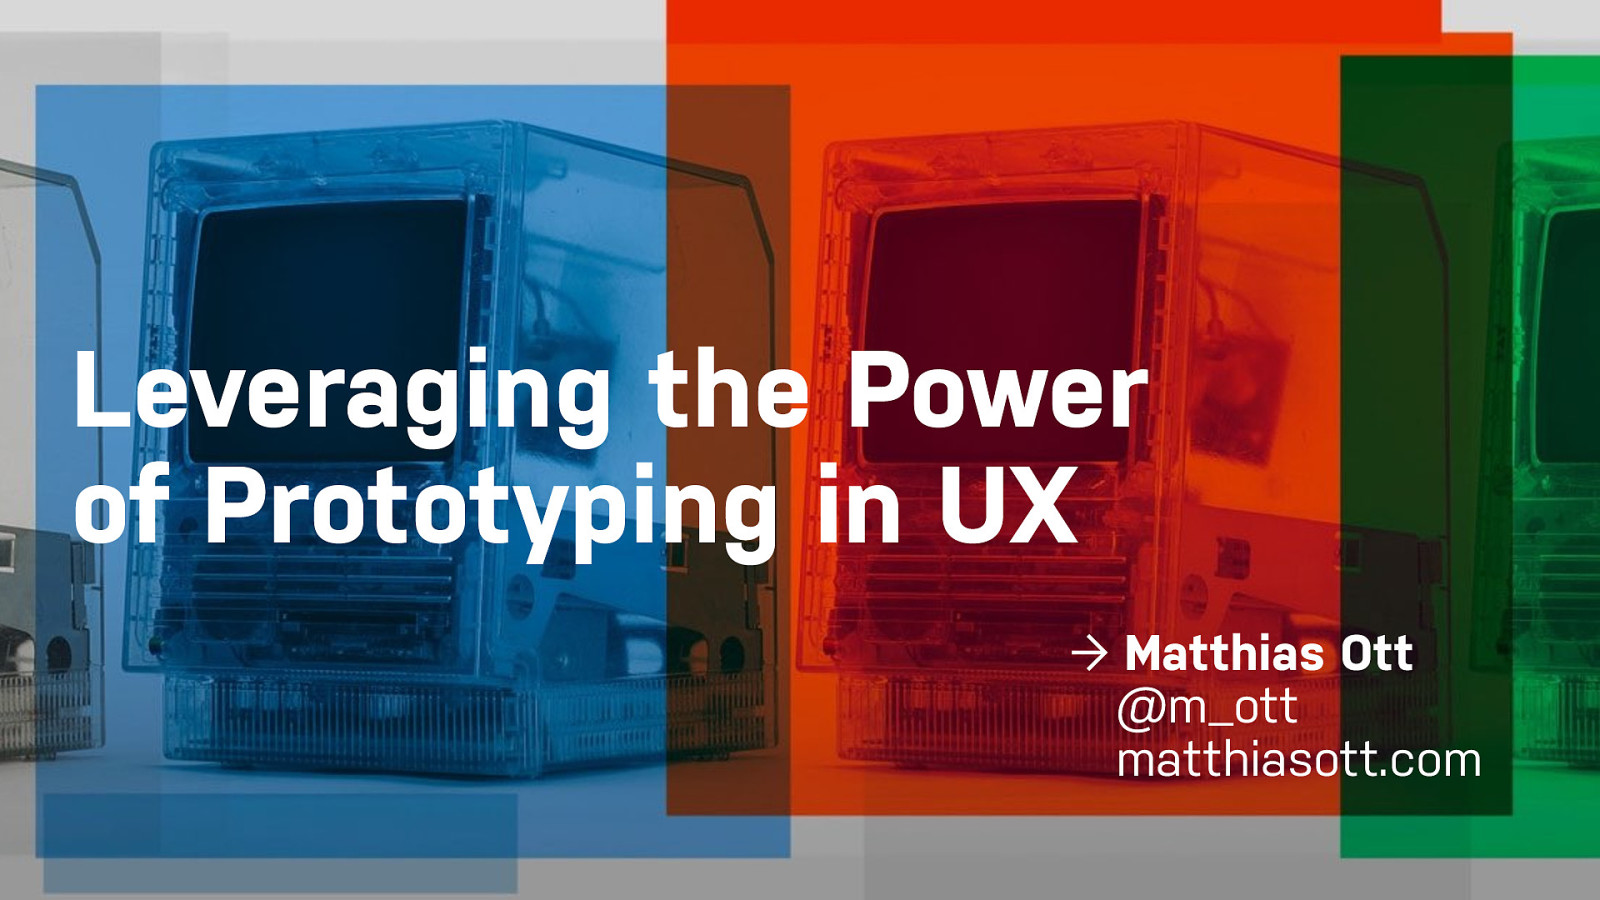 Leveraging the Power of Prototyping in UX